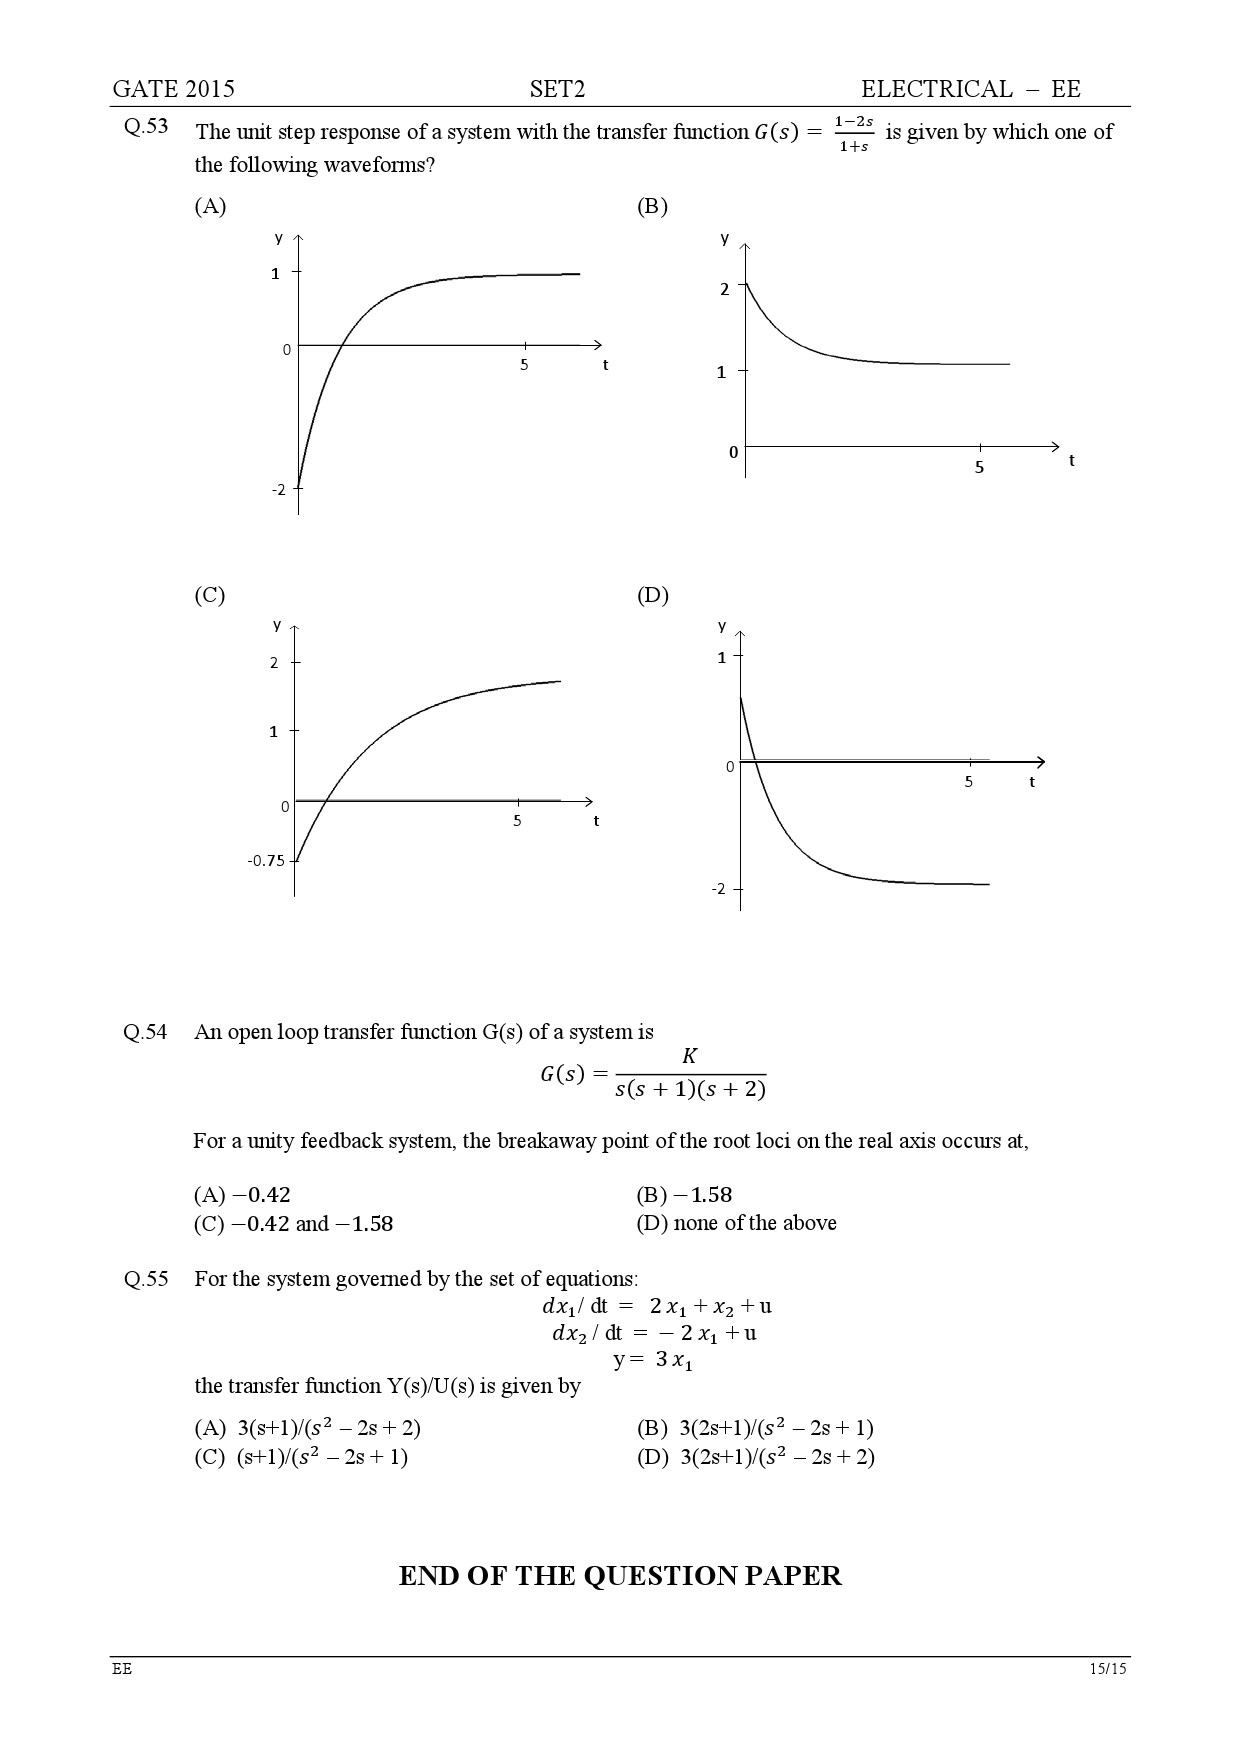 GATE Exam Question Paper 2015 Electrical Engineering Set 2 15